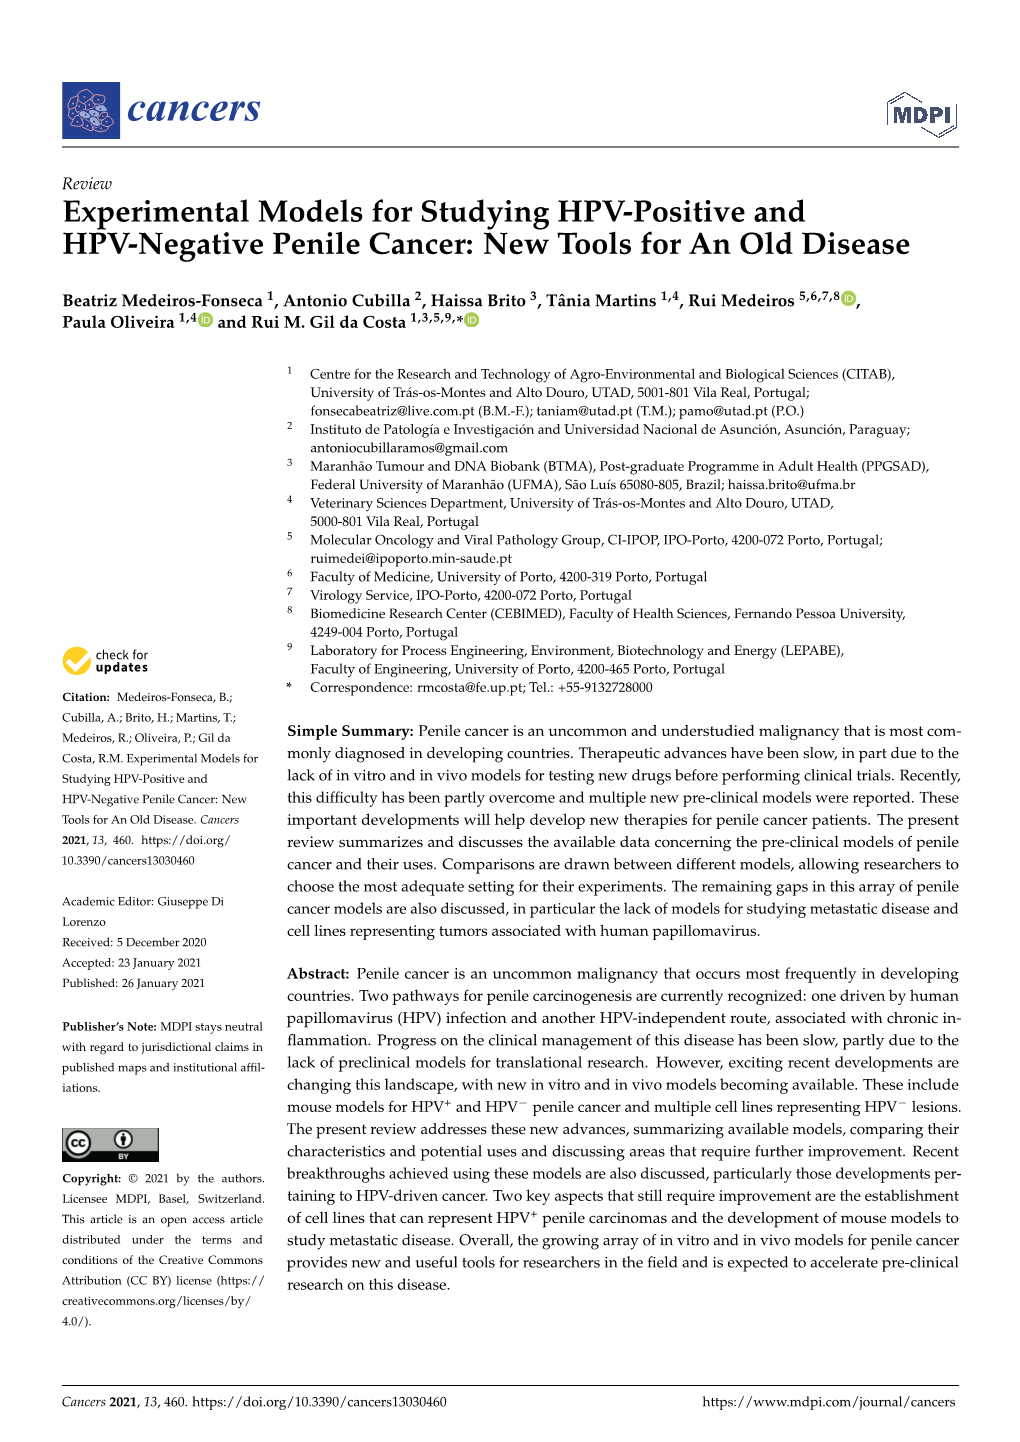 Experimental Models for Studying HPV-Positive and HPV-Negative Penile Cancer: New Tools for an Old Disease